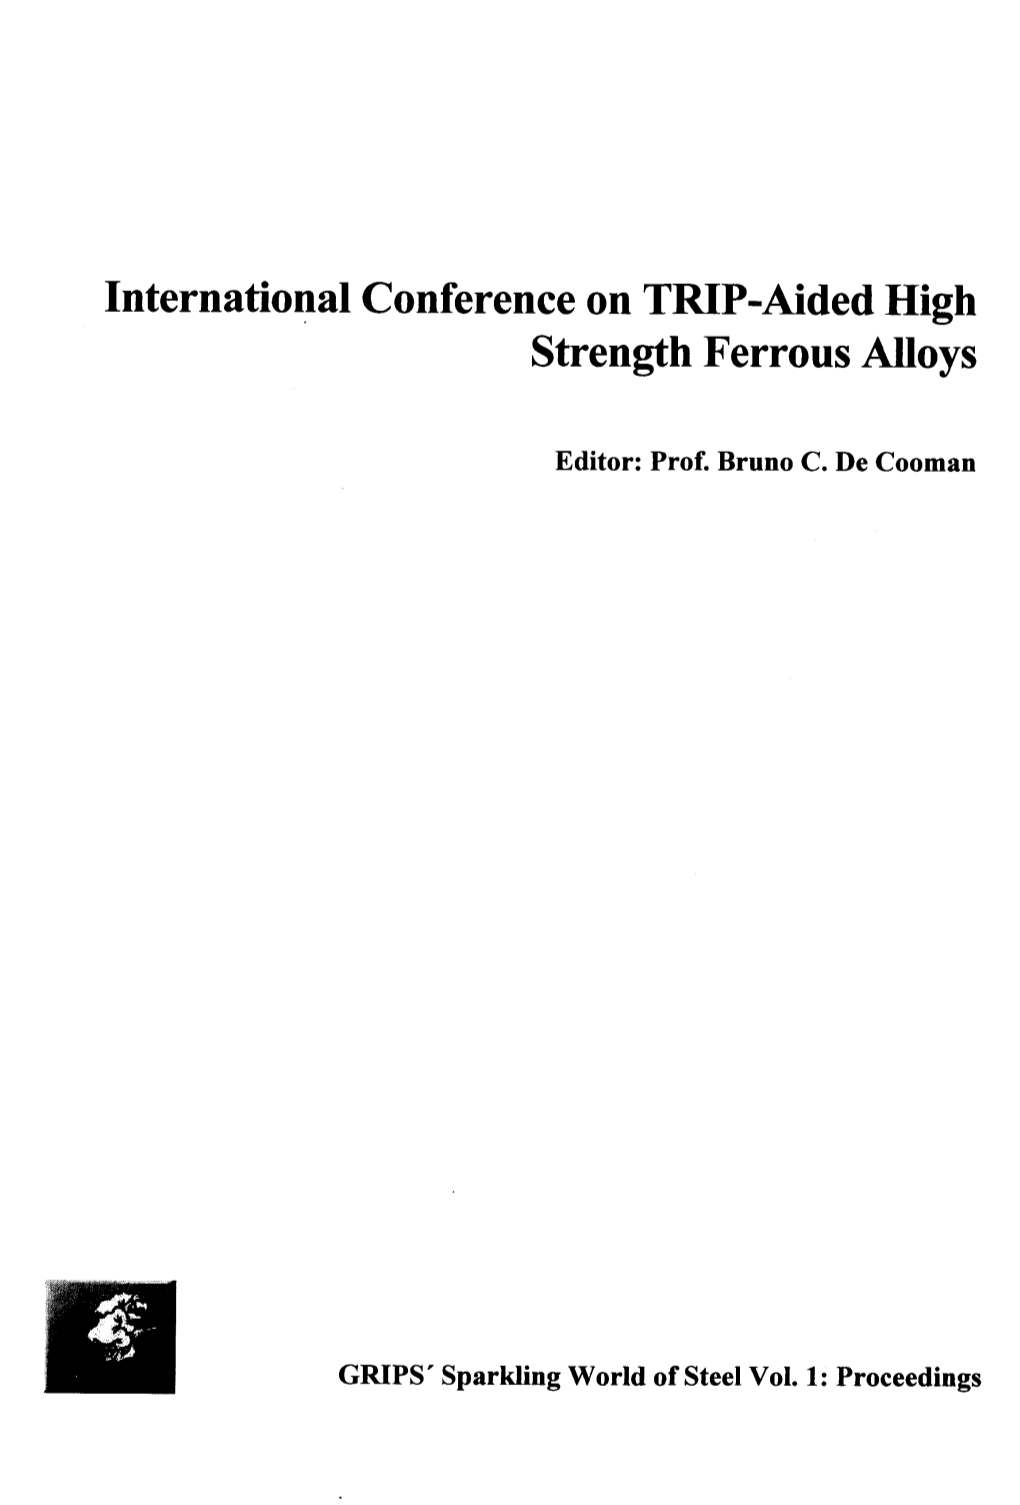 International Conference on TRIP-Aided High Strength Ferrous Alloys